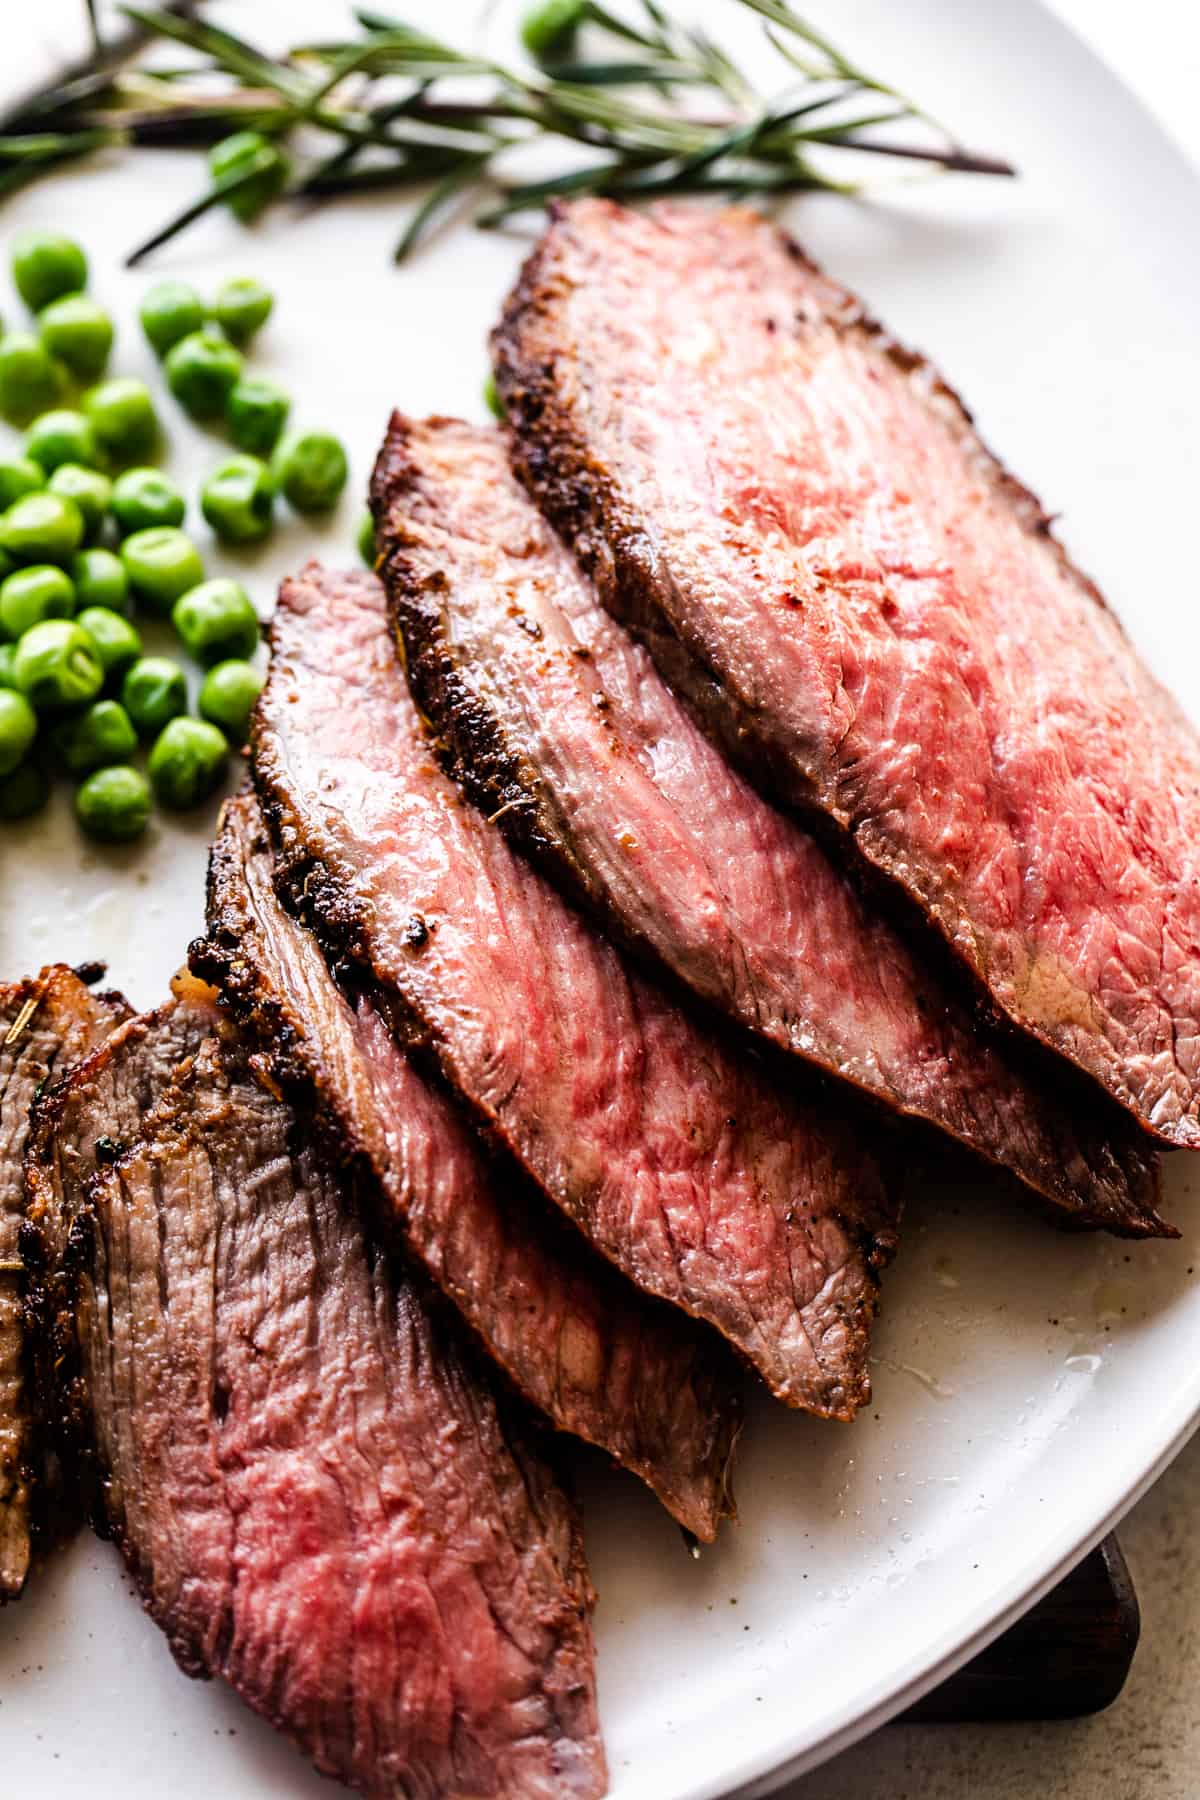 Five thinly sliced pieces of sirloin tip roast arranged on a white plate next to green peas and a branch of rosemary.